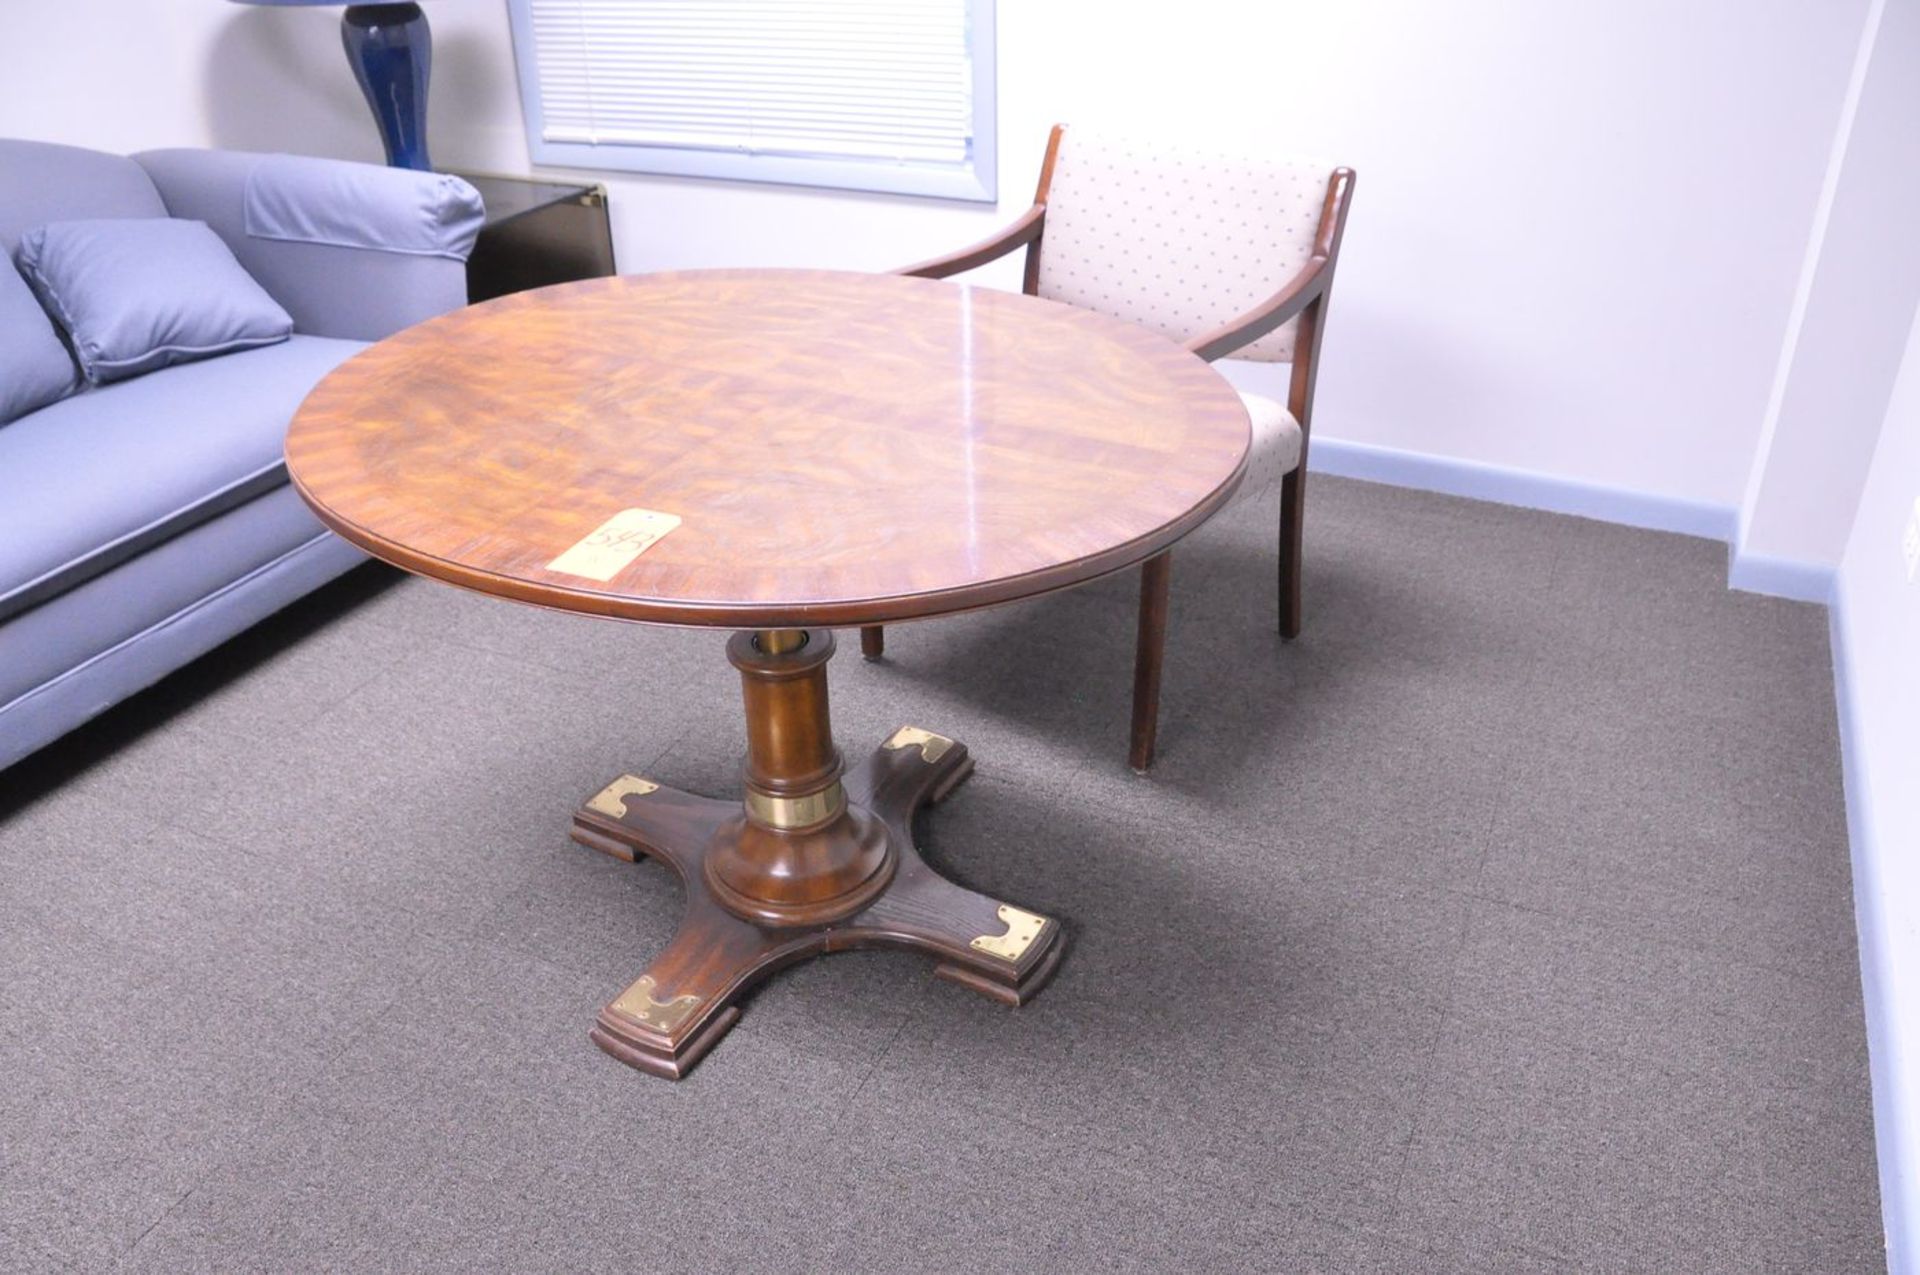 Lot - Sofa, End Table, Round Table, Chair and Desk Lamp - Image 2 of 3